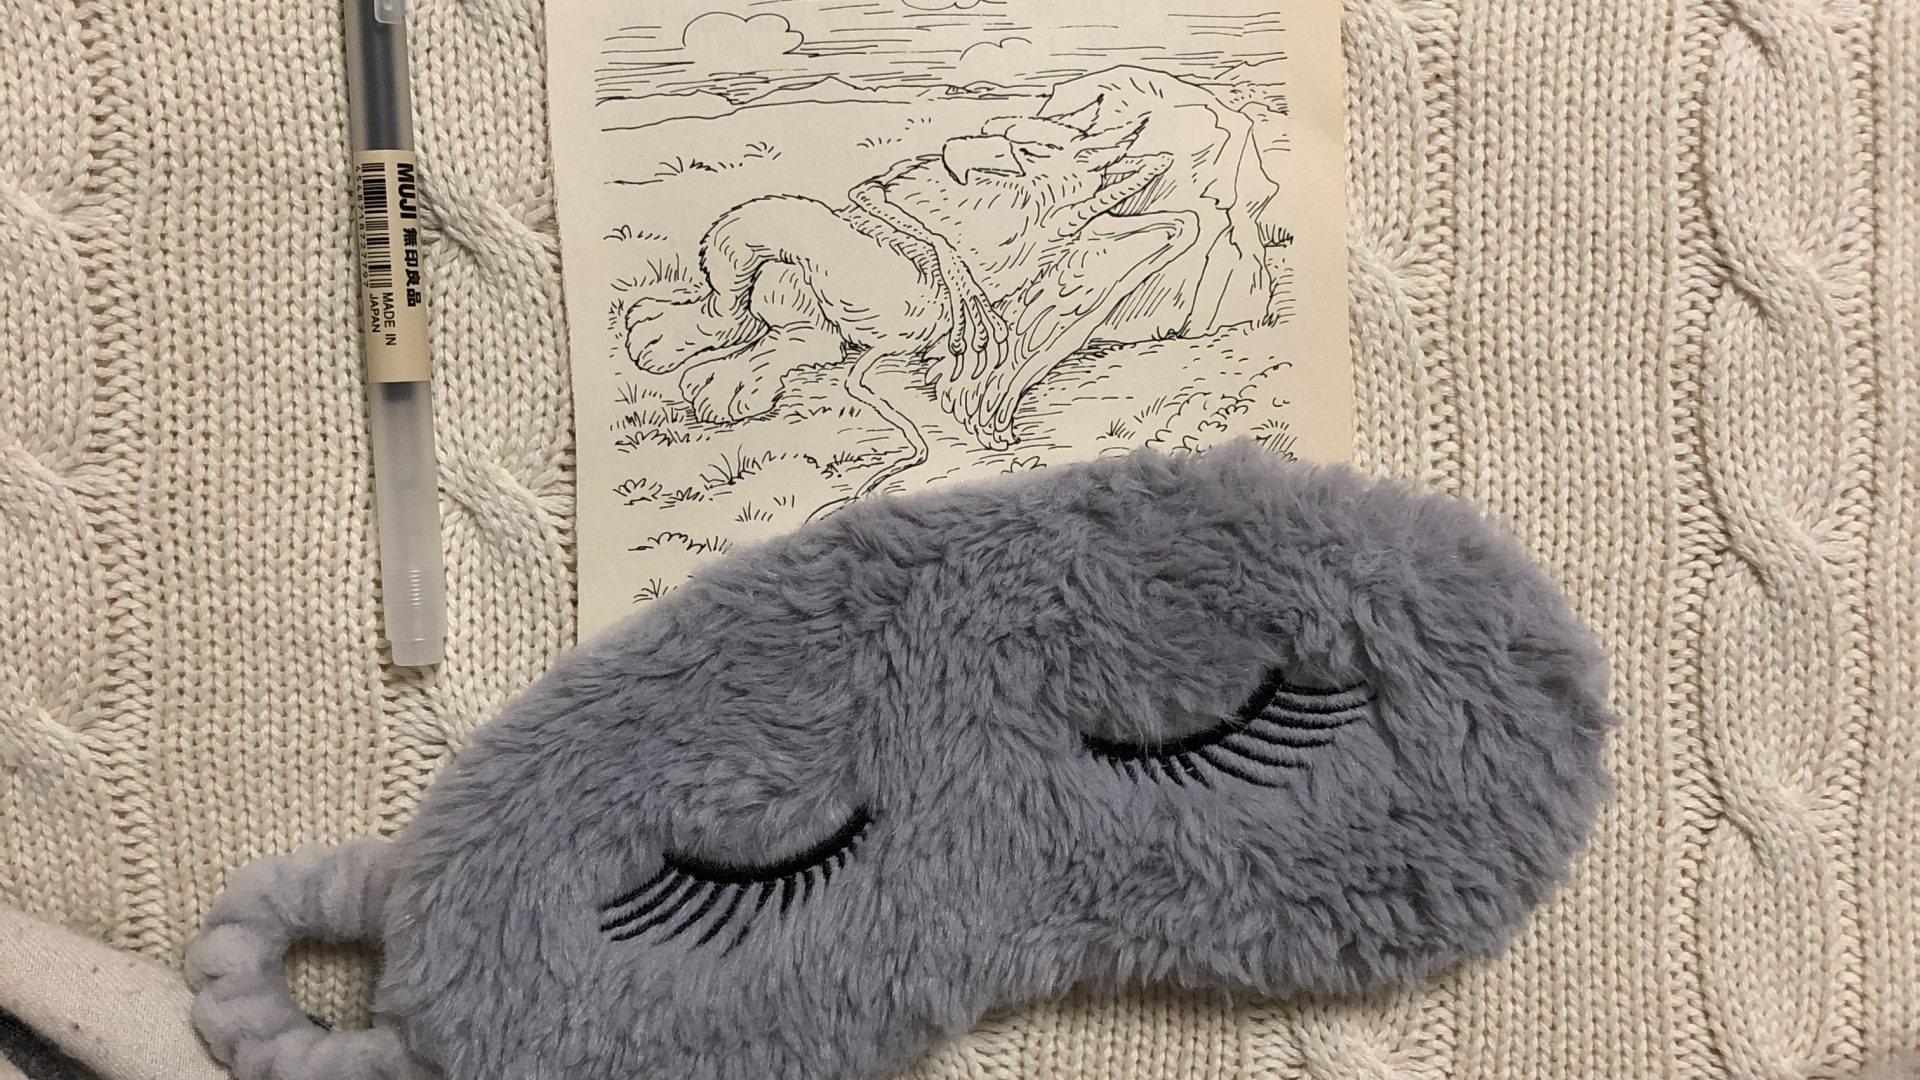 Sleep mask and image of sleeping griffin from Alice in Wonderland.